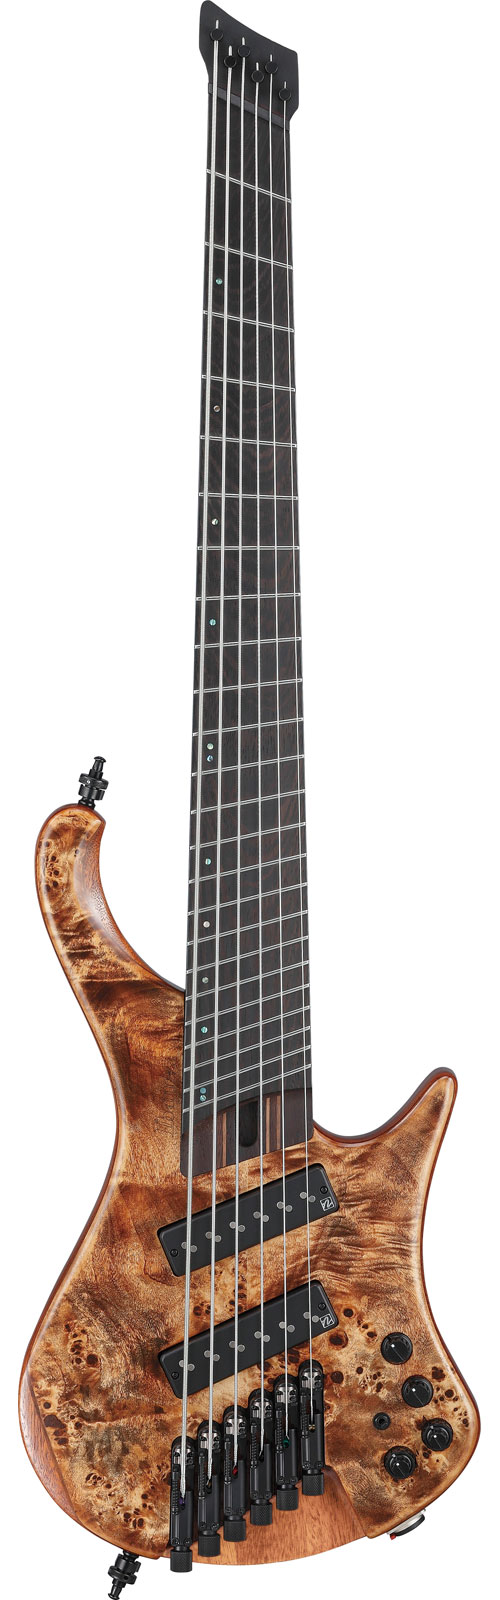 IBANEZ EHB1506MS-ABL ANTIQUE BROWN STAINED BASS WORKSHOP